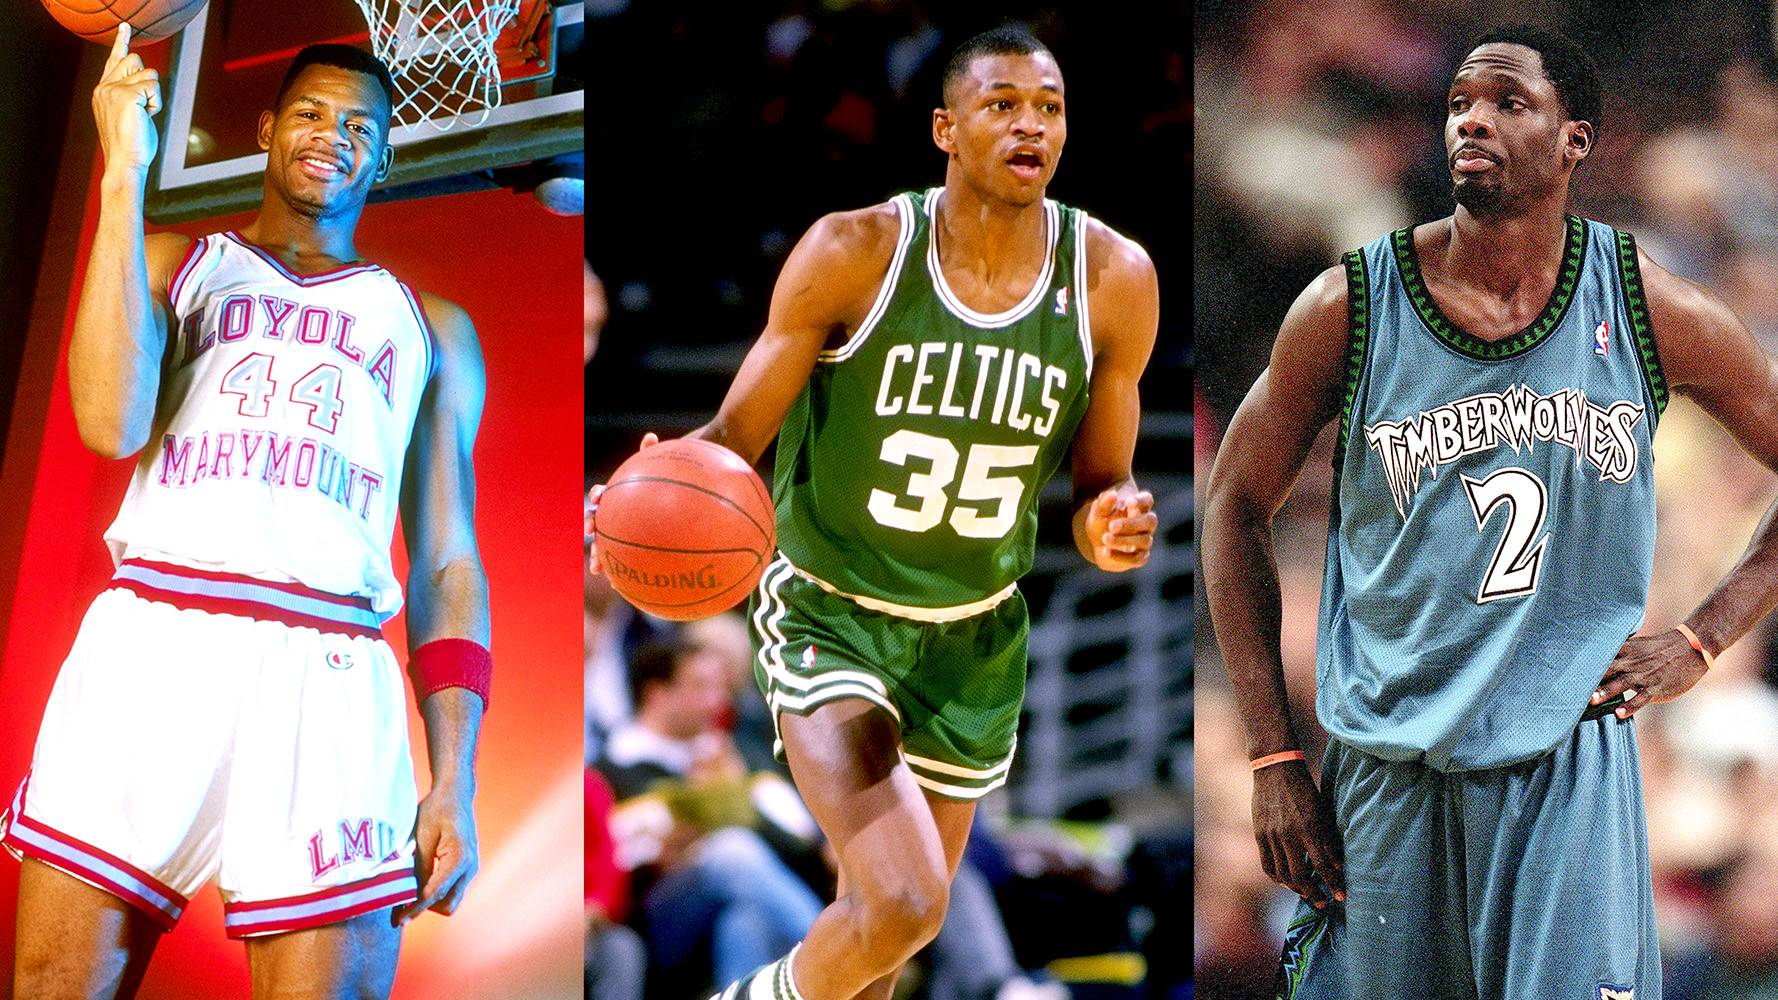 Celtics Star Reggie Lewis Died At Age 27 Because of Cardiac Arrest On The  Court In 1993, Fadeaway World